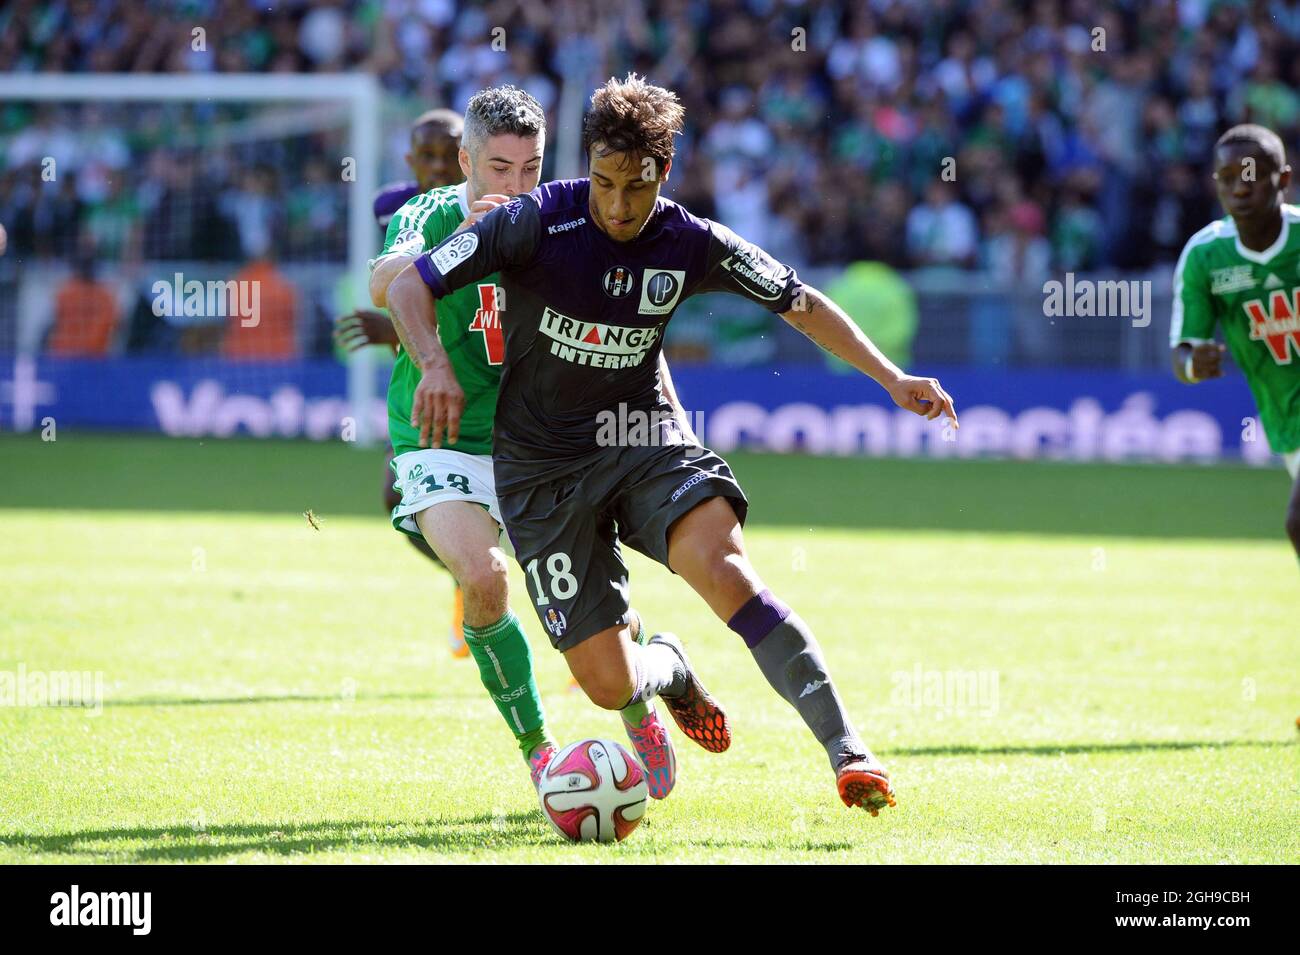 Oscar Trejo during the French Ligue 1 match between AS Saint Etienne and Toulouse at the Stade Geoffroy Guichard in France on October 05, 2014. Stock Photo